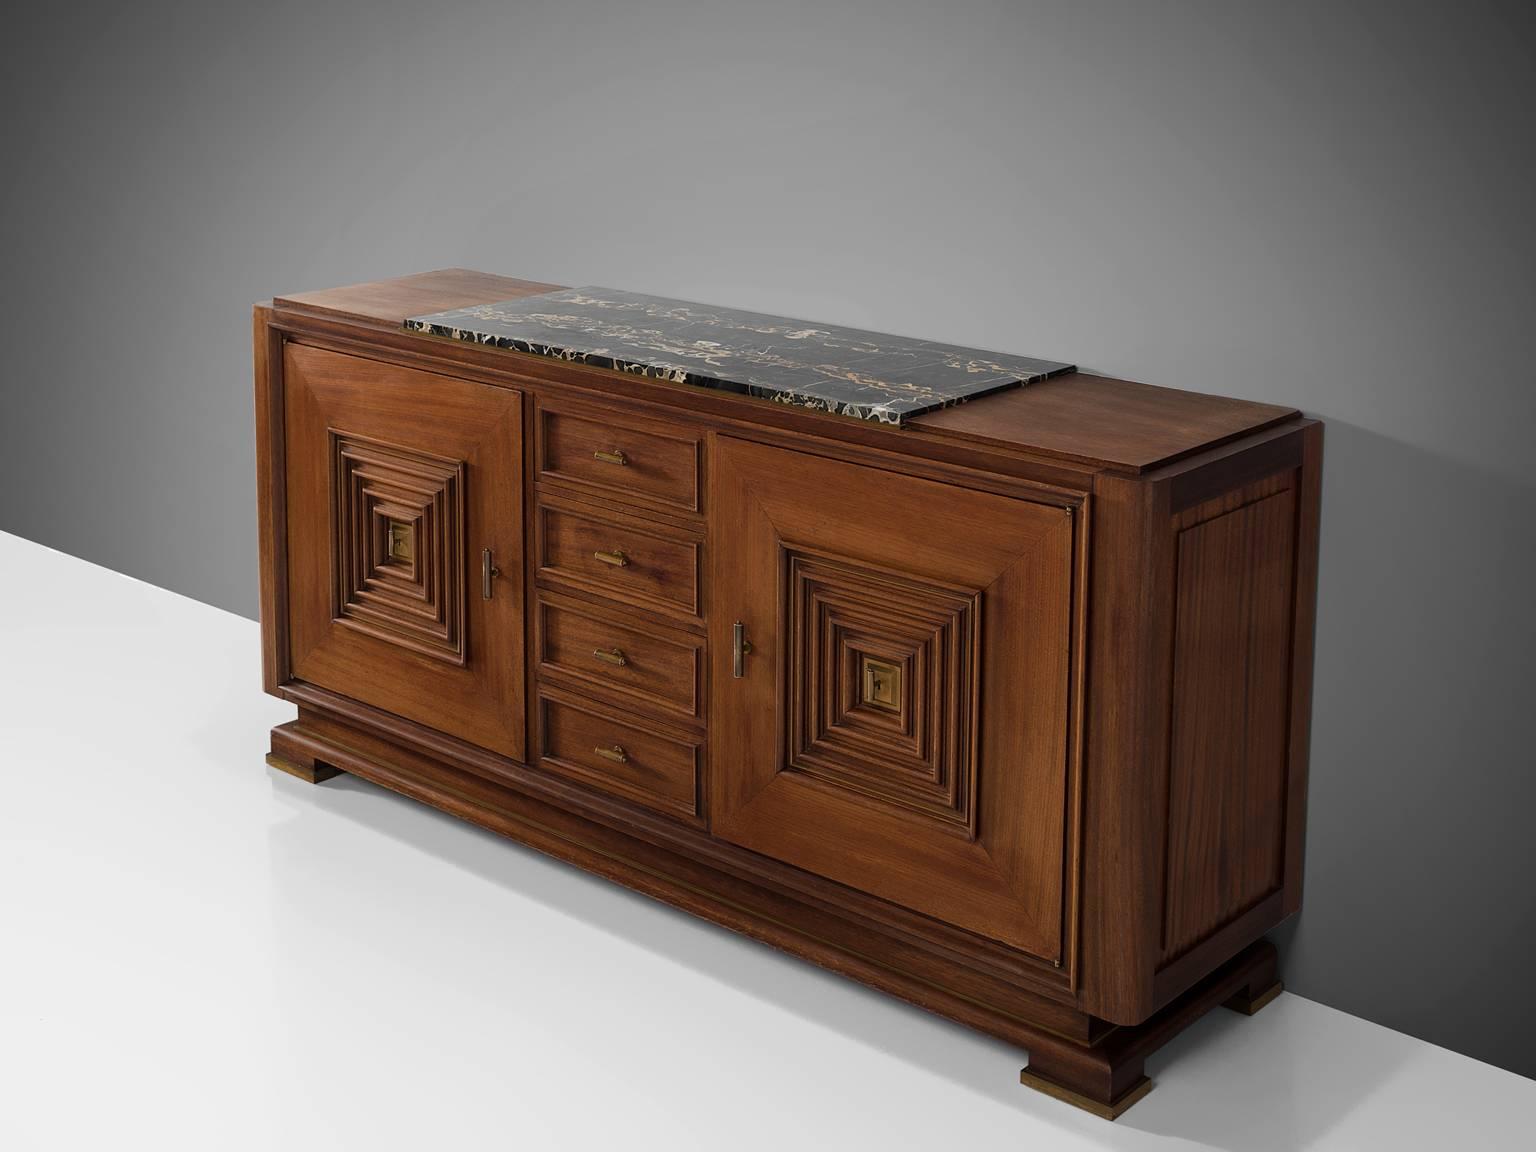 French Art Deco Credenza in Walnut and Marble, circa 1930